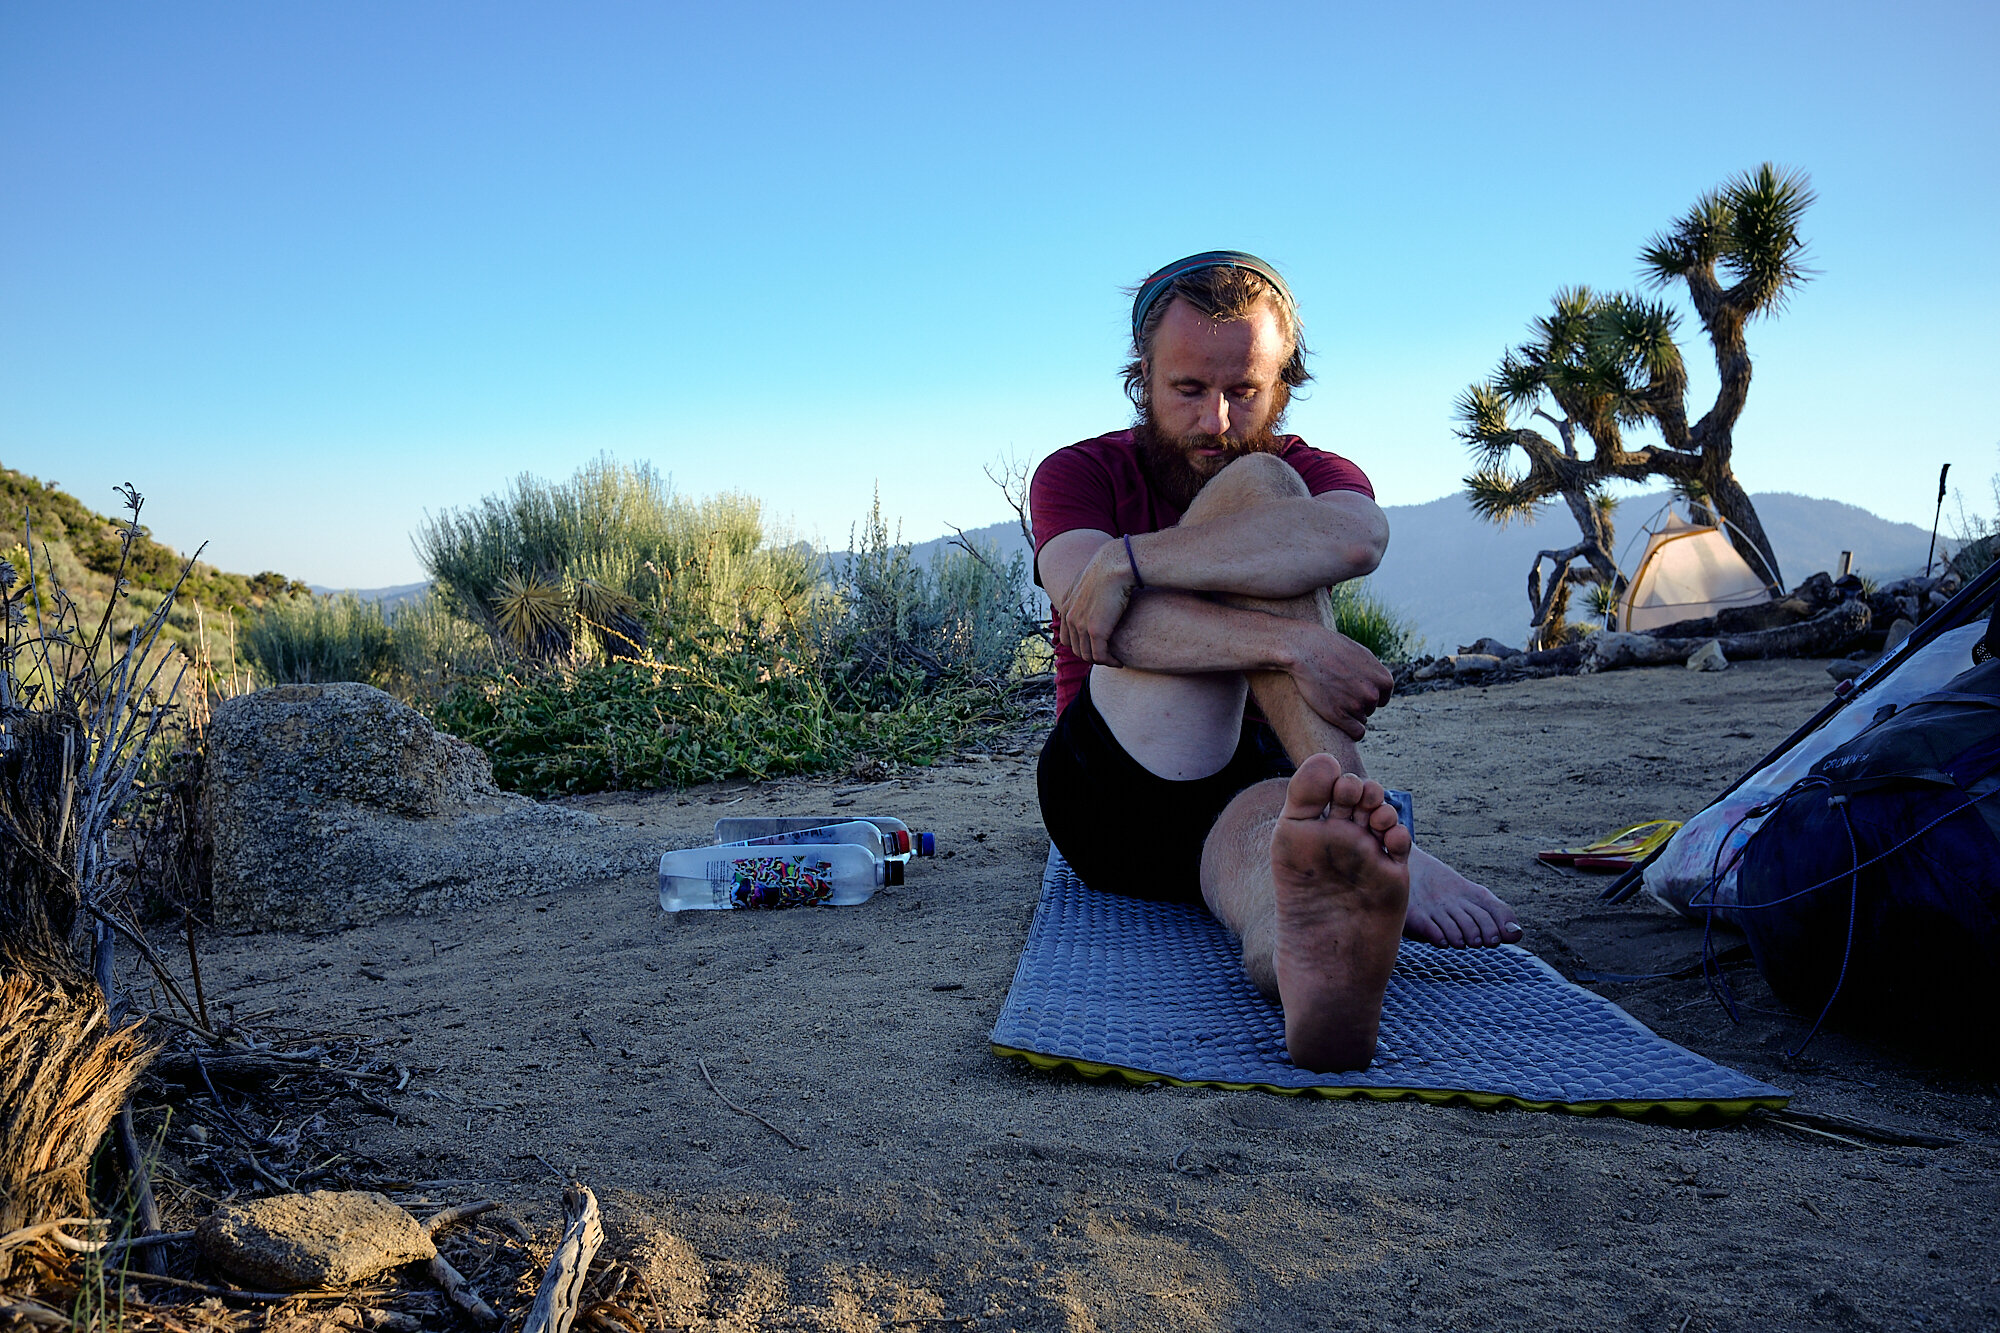  Lebowski runs through his post-hike stretch routine in camp at a water cache. | 6/13/19 Mile 617.8, 4,954' 